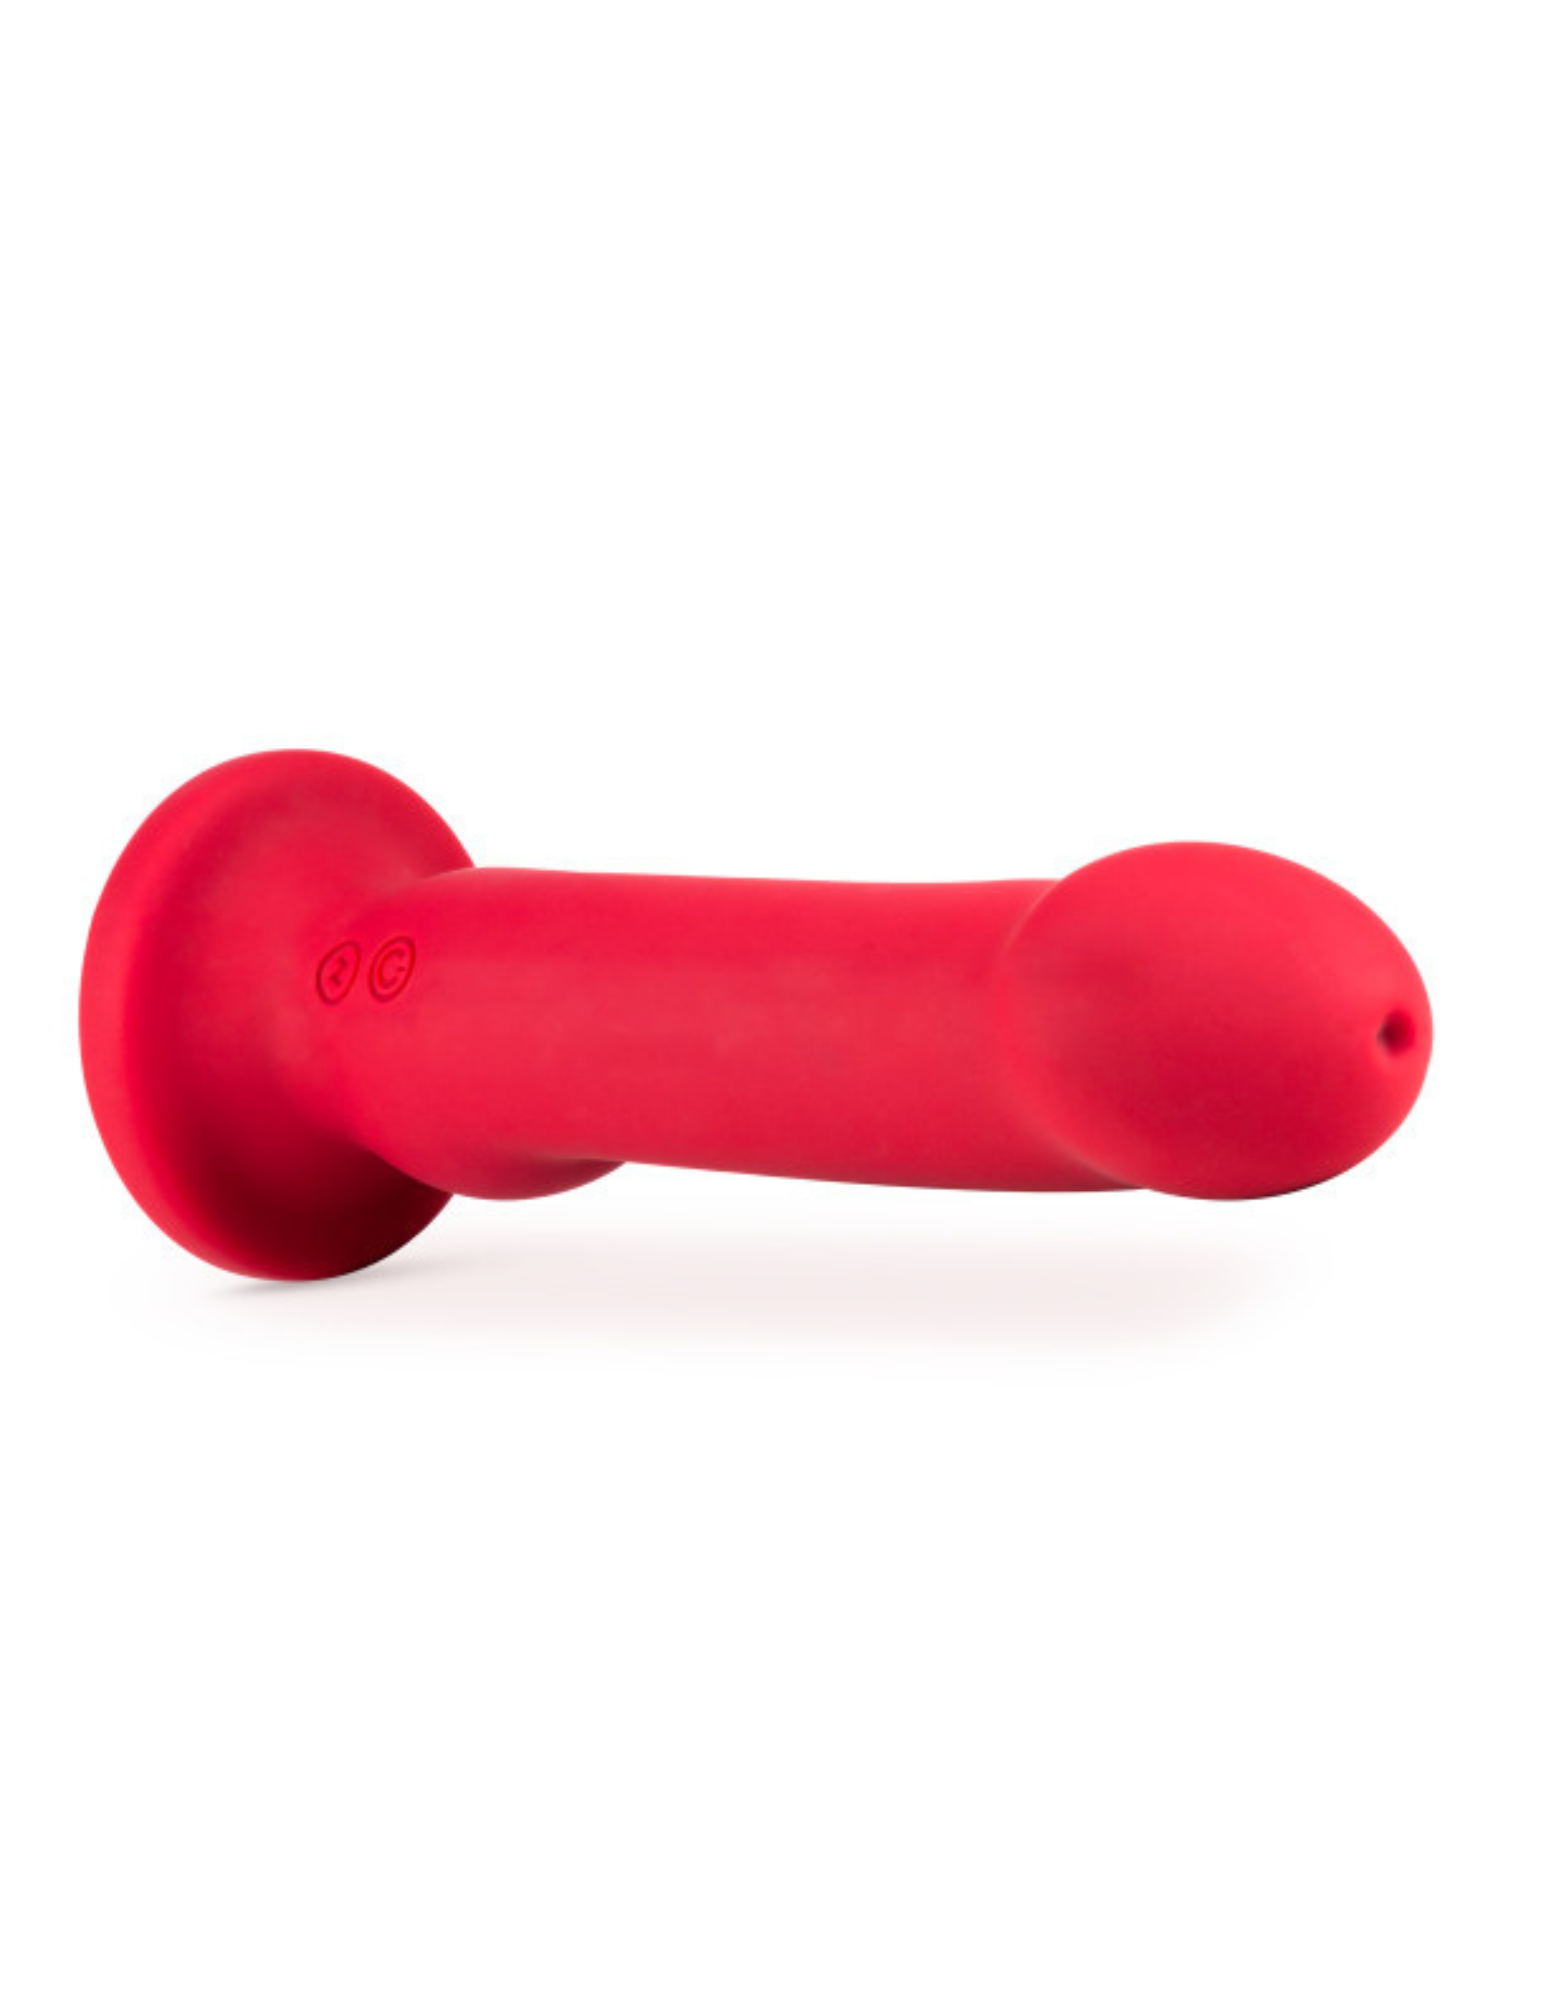 Side view of the Impressions Las Vegas Vibrator from Blush (crimson) shows its realistic head and thick shaft.